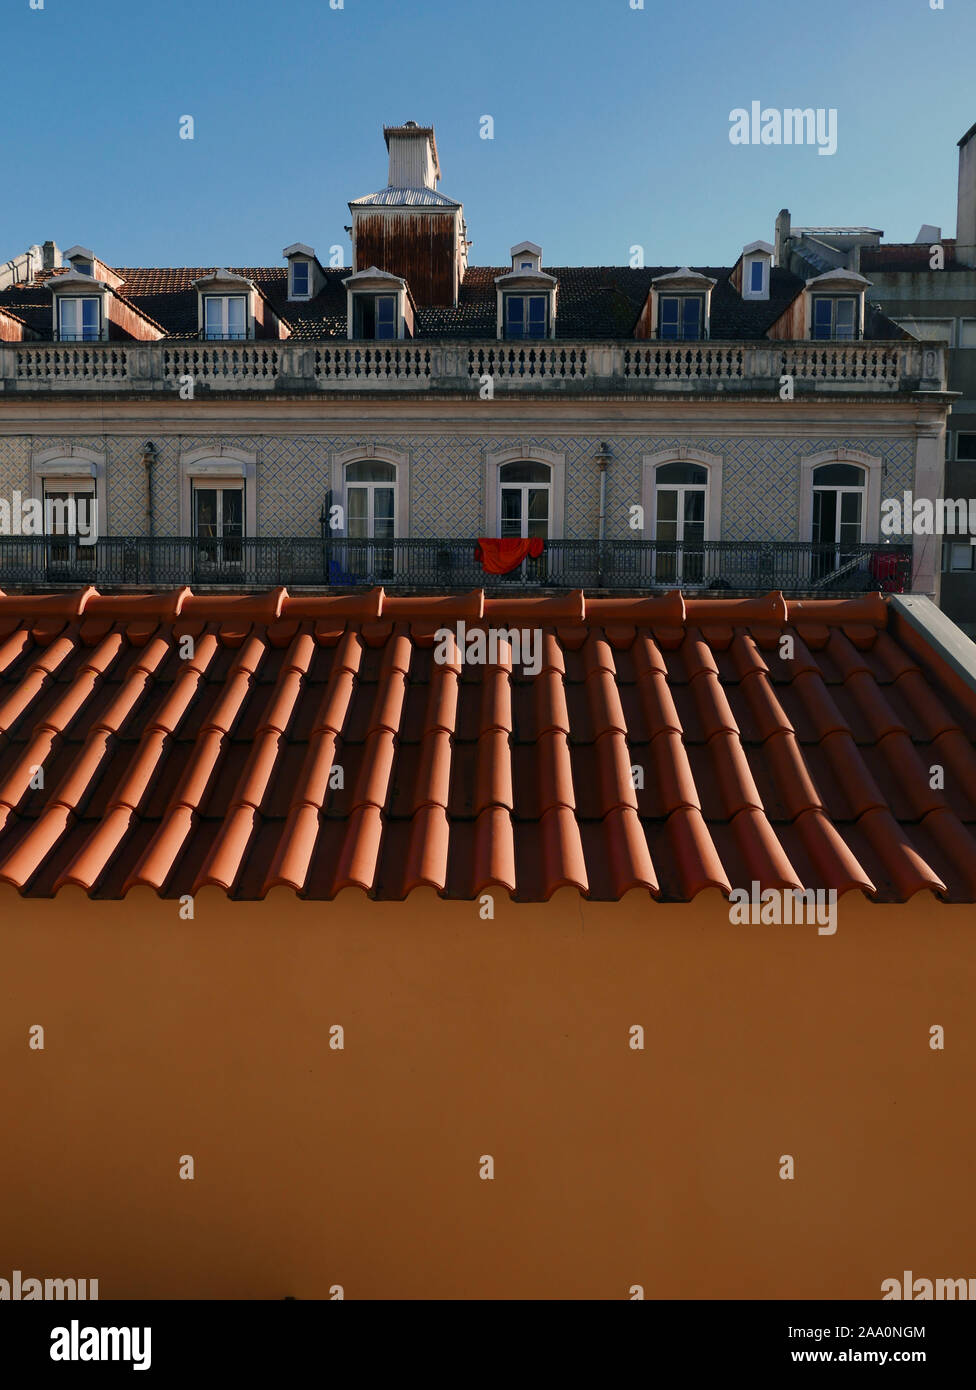 View from York House Hotel in the Lapa district of Lisbon, Portugal looking over red tiled rooftop Stock Photo